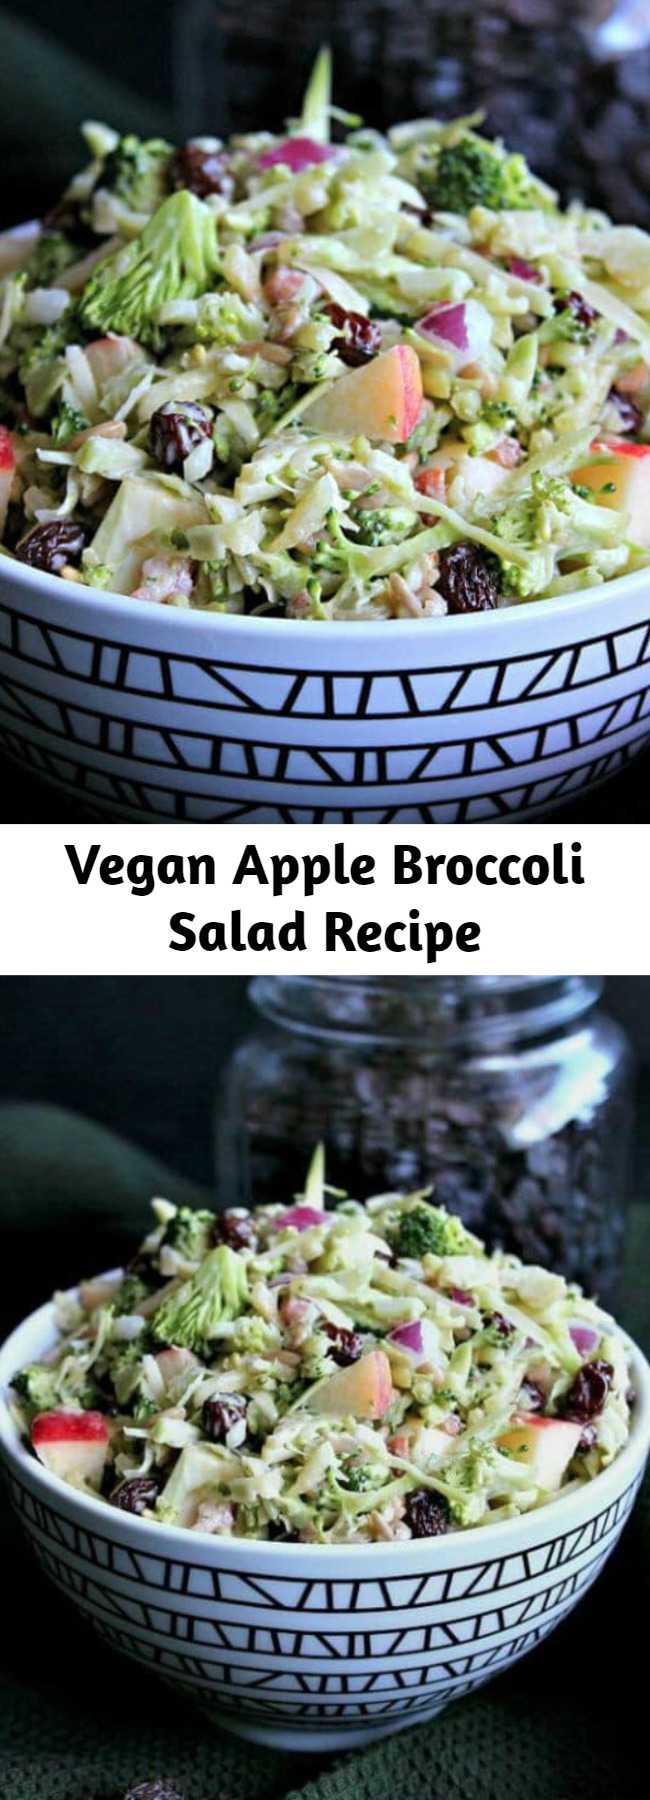 Vegan Apple Broccoli Salad Recipe - Vegan Apple Broccoli Salad has everyone's favorite vegetables and fruits with a slightly sweet and tangy dressing. #salads #sides #apple #applesalads #broccolisalads